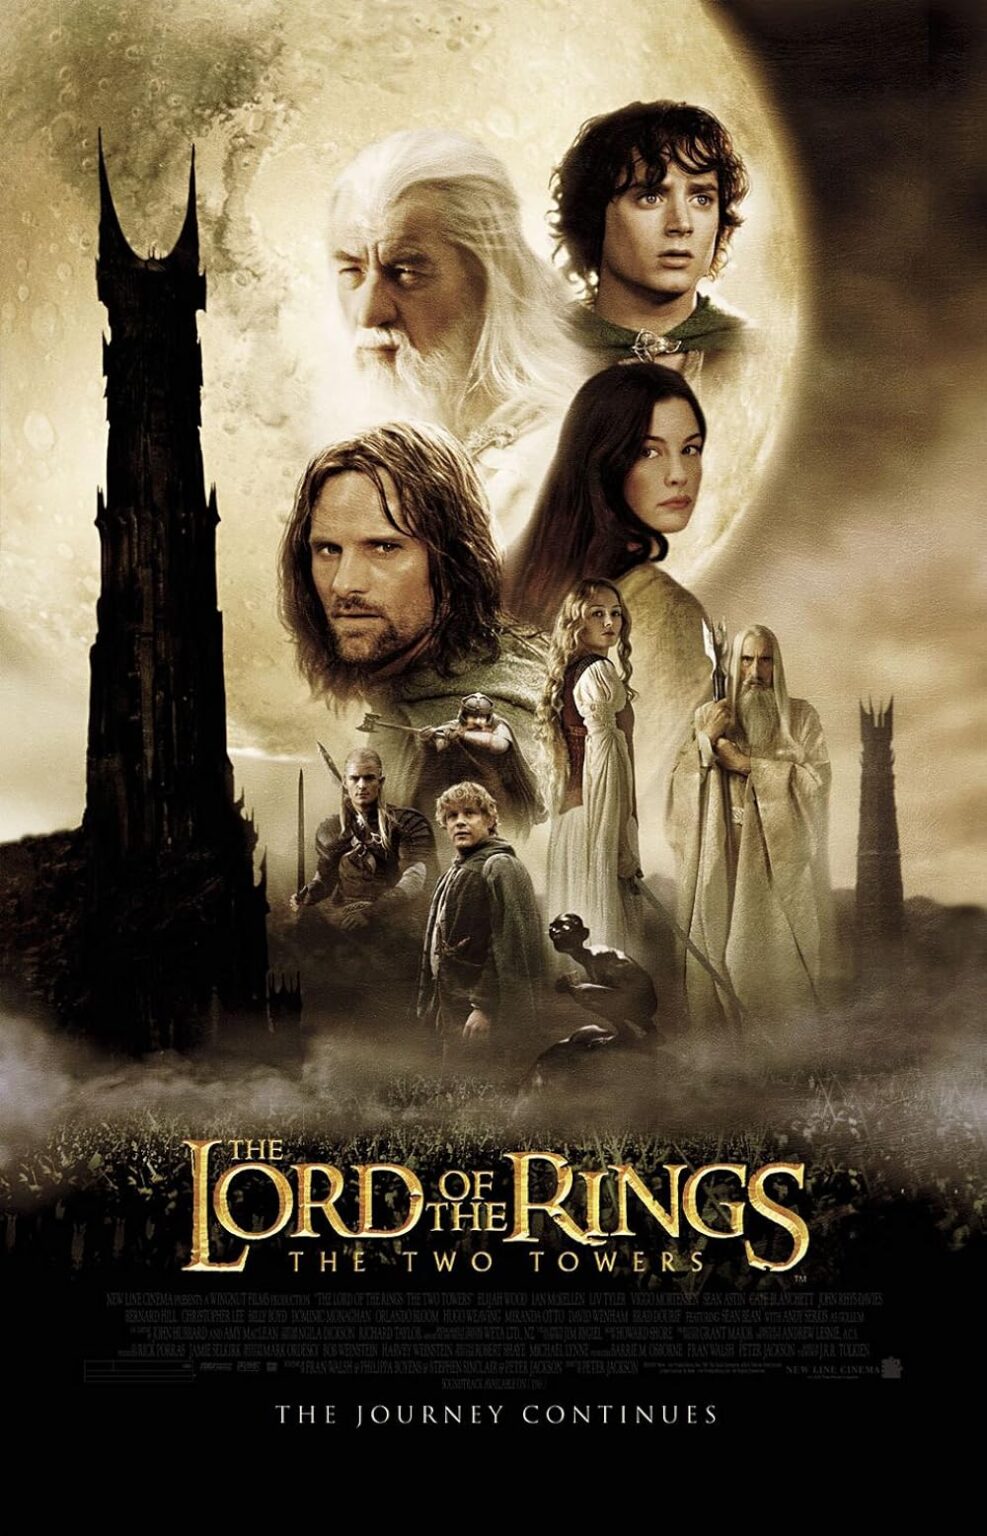 FULL MOVIE: The Lord of the Rings: The Two Towers (2002)